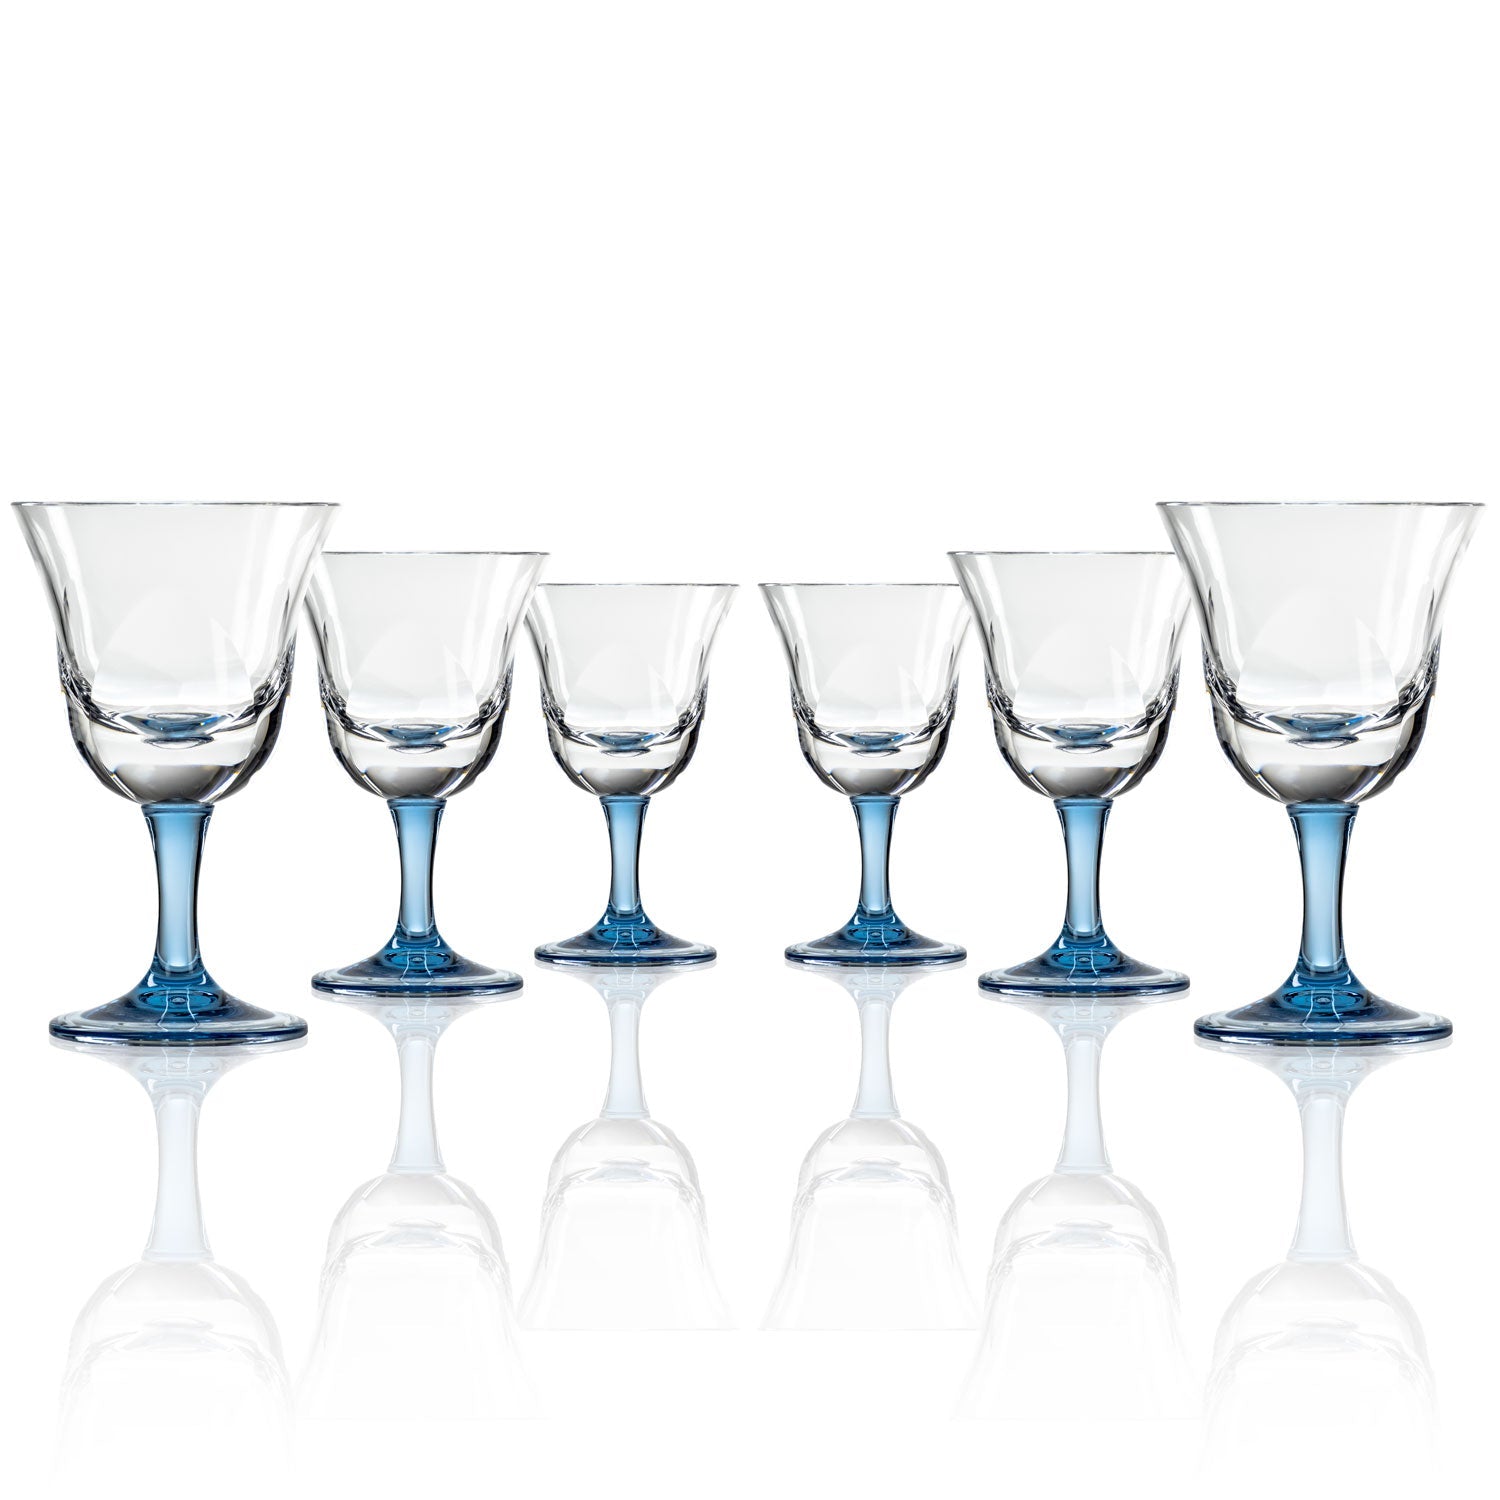 Set of 6, 10-ounce blue acrylic wine glasses in the Fiori collection by Merritt Designs. Front view on white background